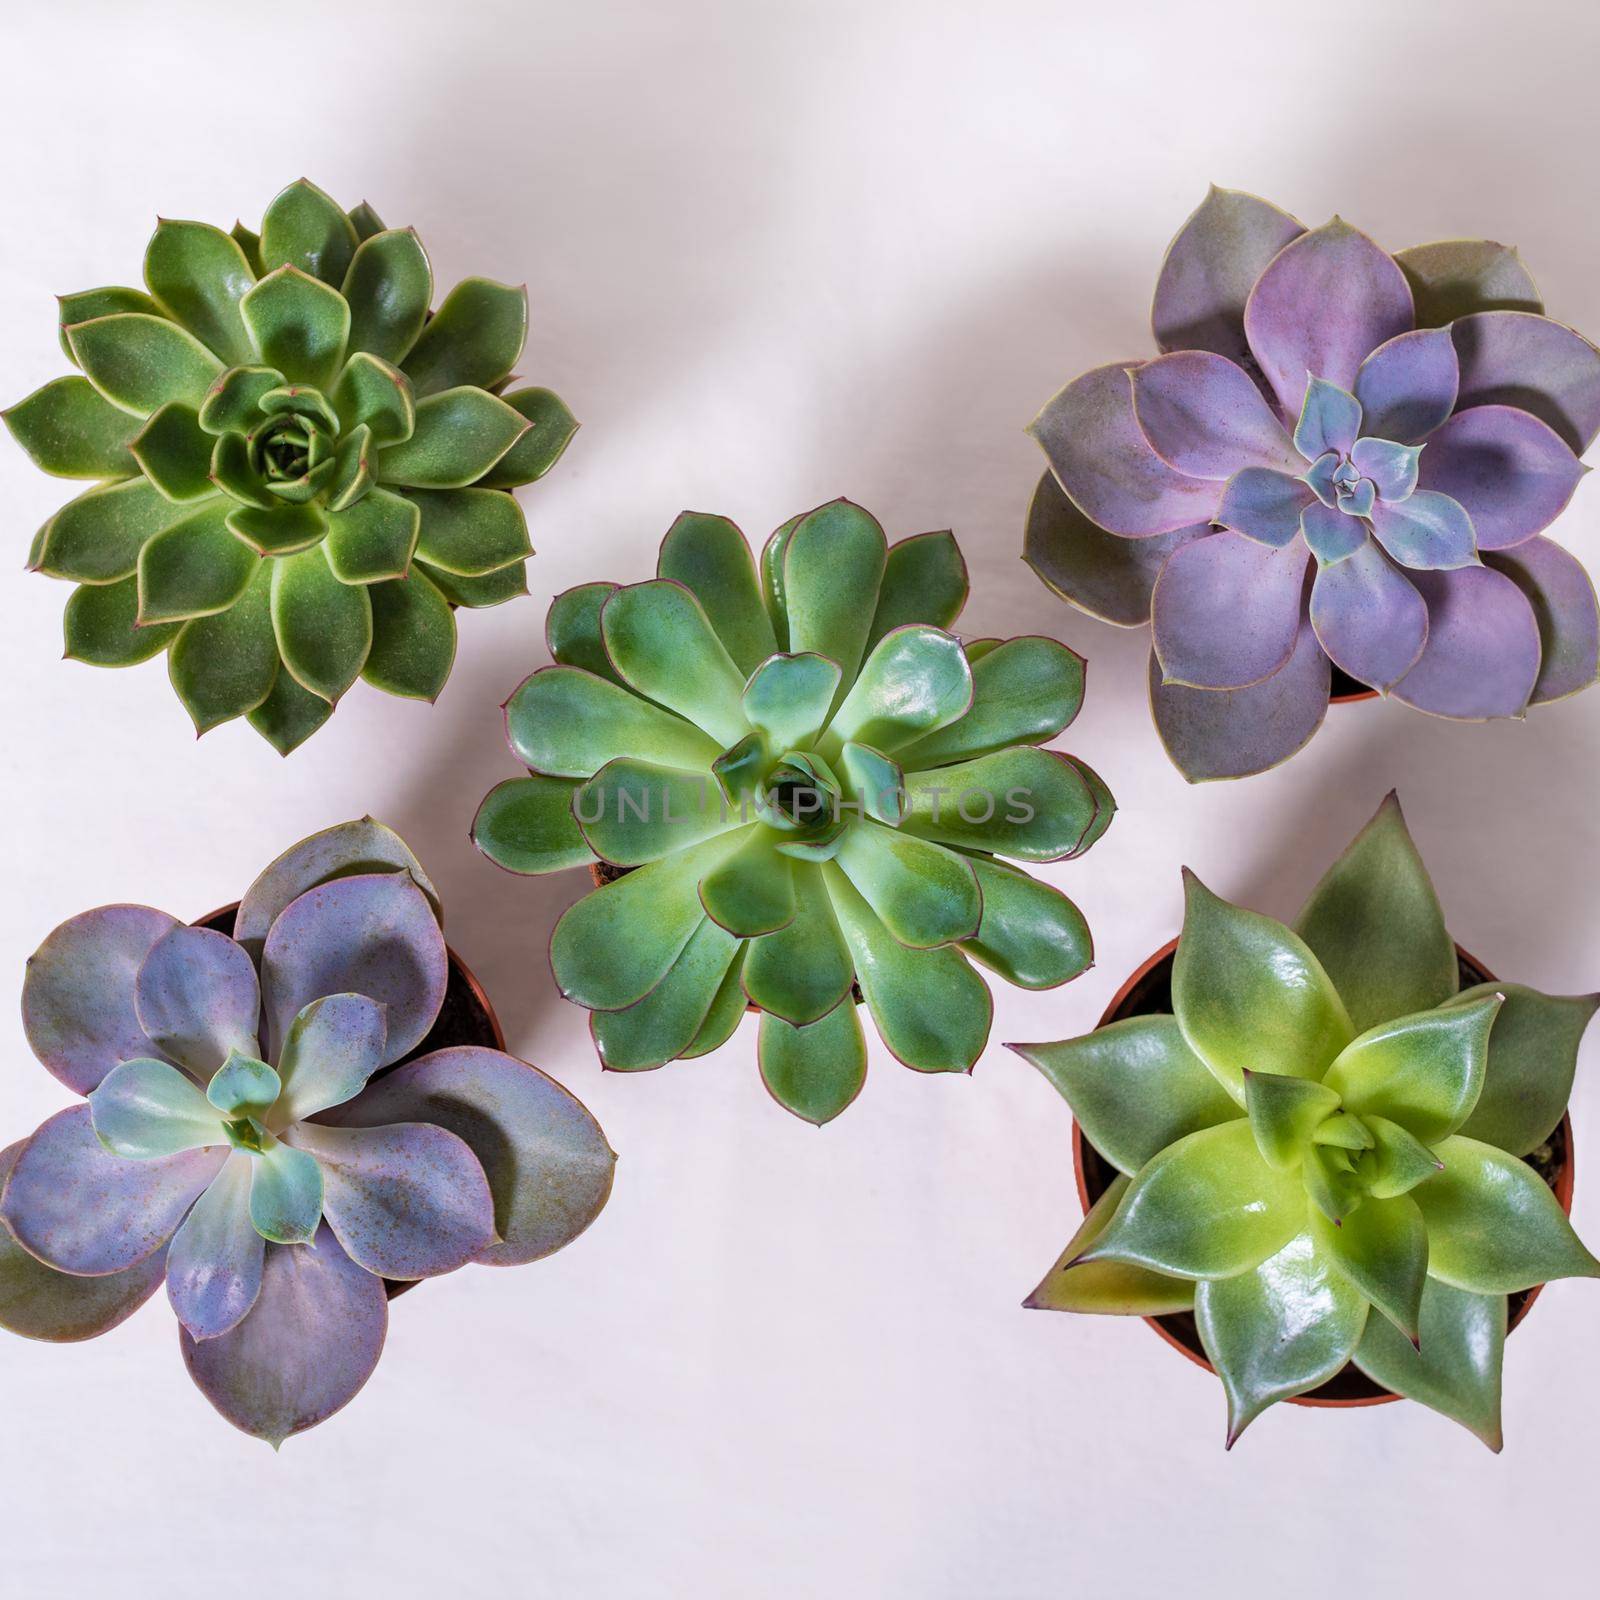 Succulent plants from above